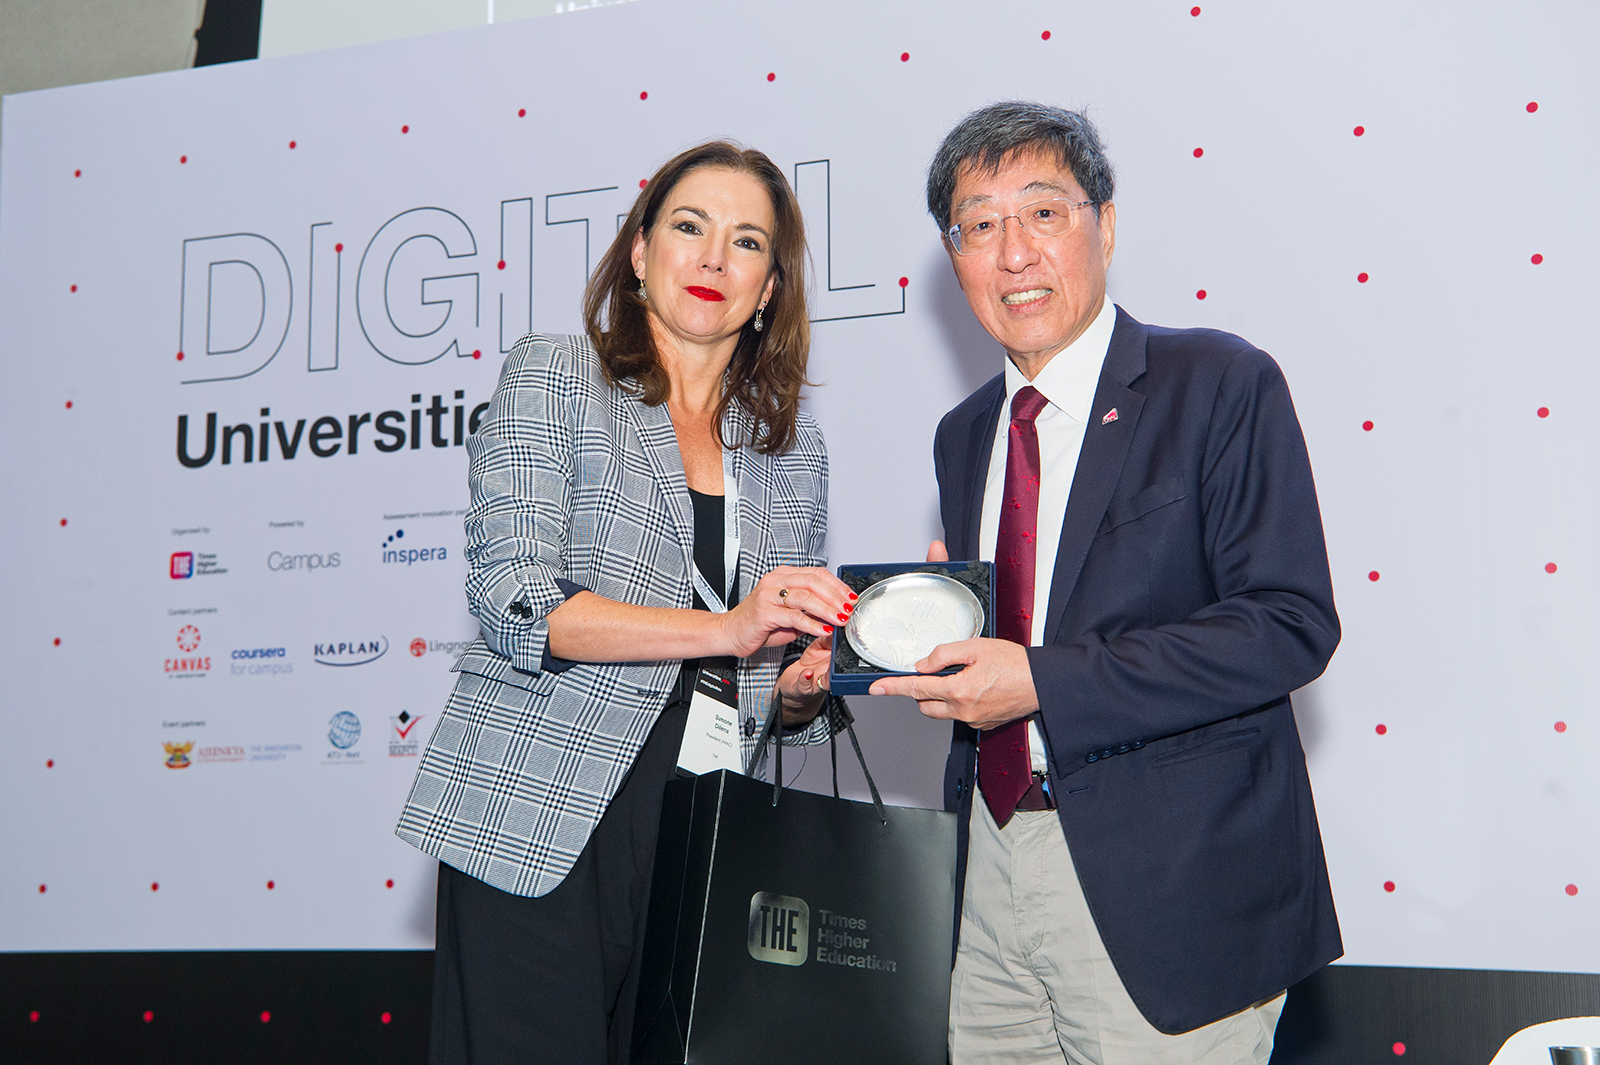 Ms Simone Dilena (left), President of APAC of THE, presented a gift to President Kuo.